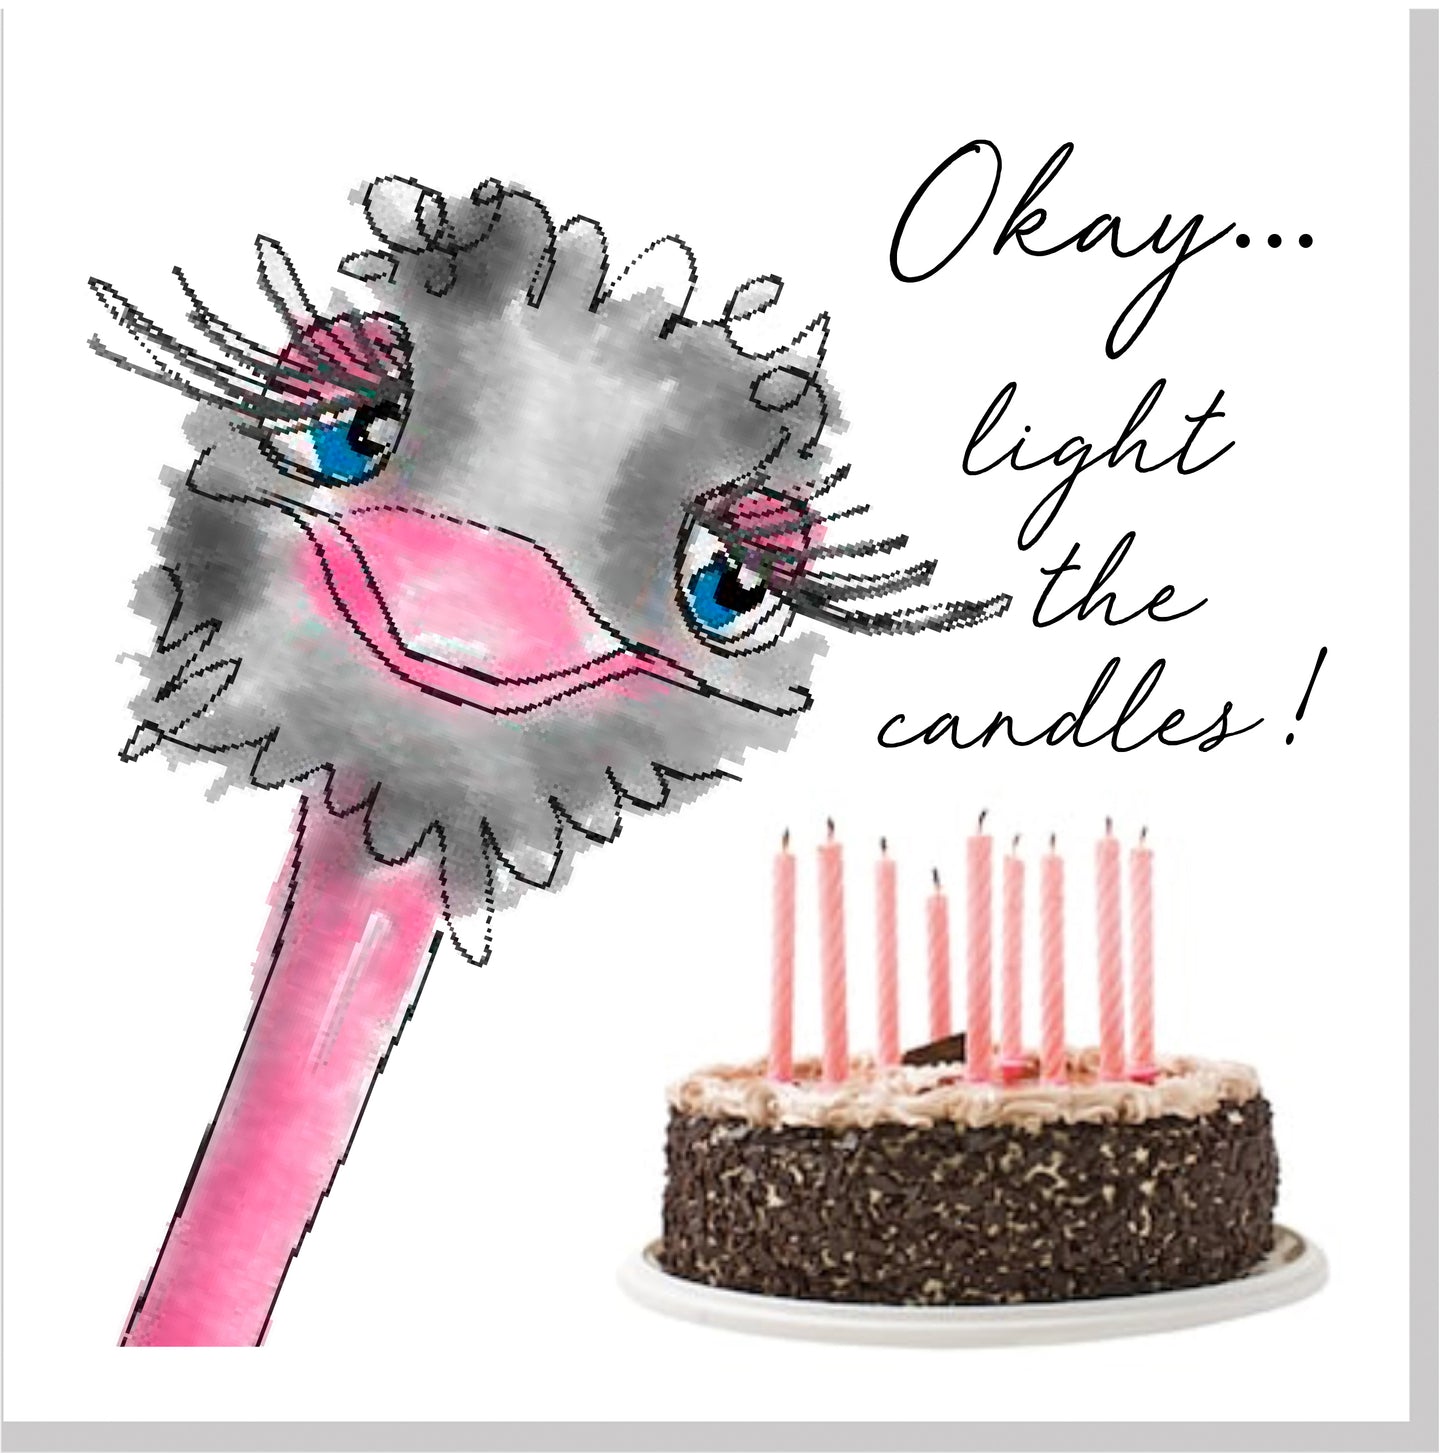 Ostrich light the candles square card